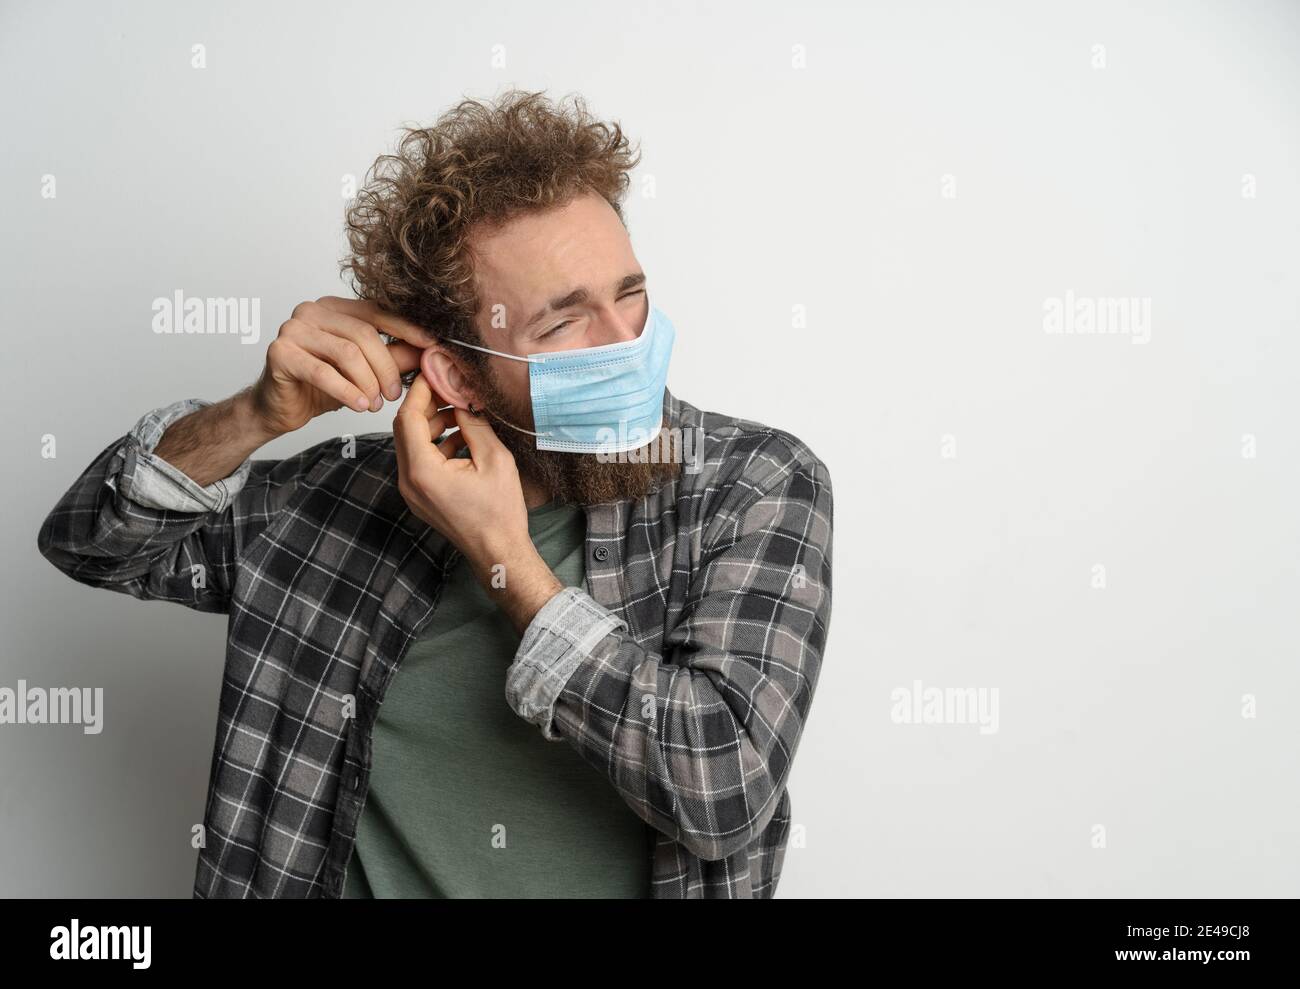 Putting on or taking off protective sterile medical mask on his face to protect coronavirus, with curly hair, young man wearing plaid shirt and olive Stock Photo